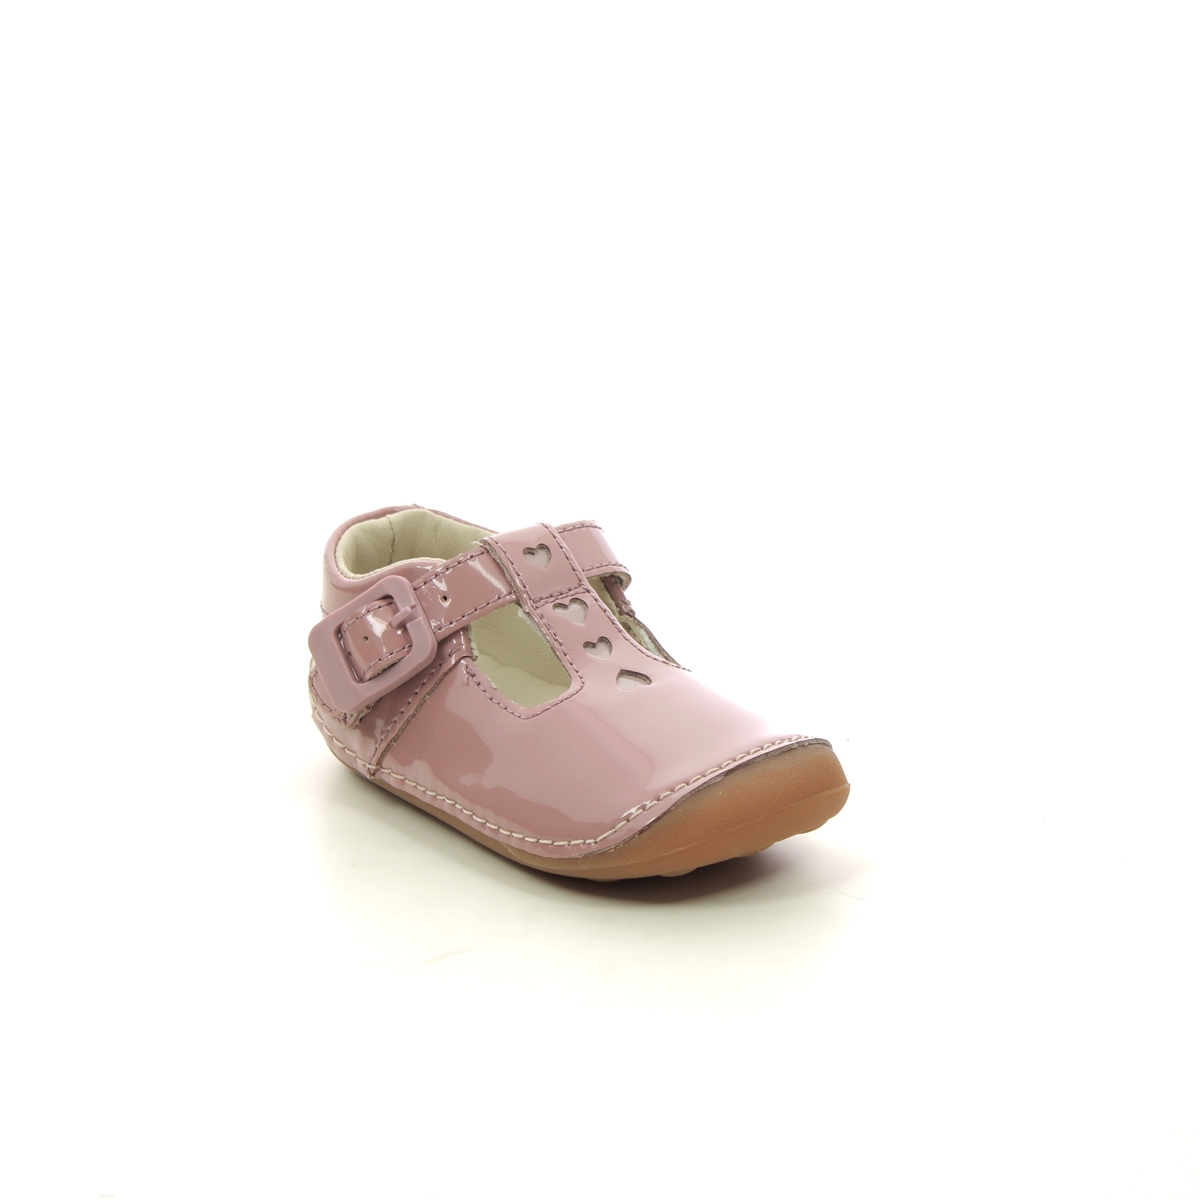 Clarks Tiny Beat T Pink Kids Girls First And Baby Shoes 694086F In Size 4.5 In Plain Pink F Width Fitting Regular Fit For kids